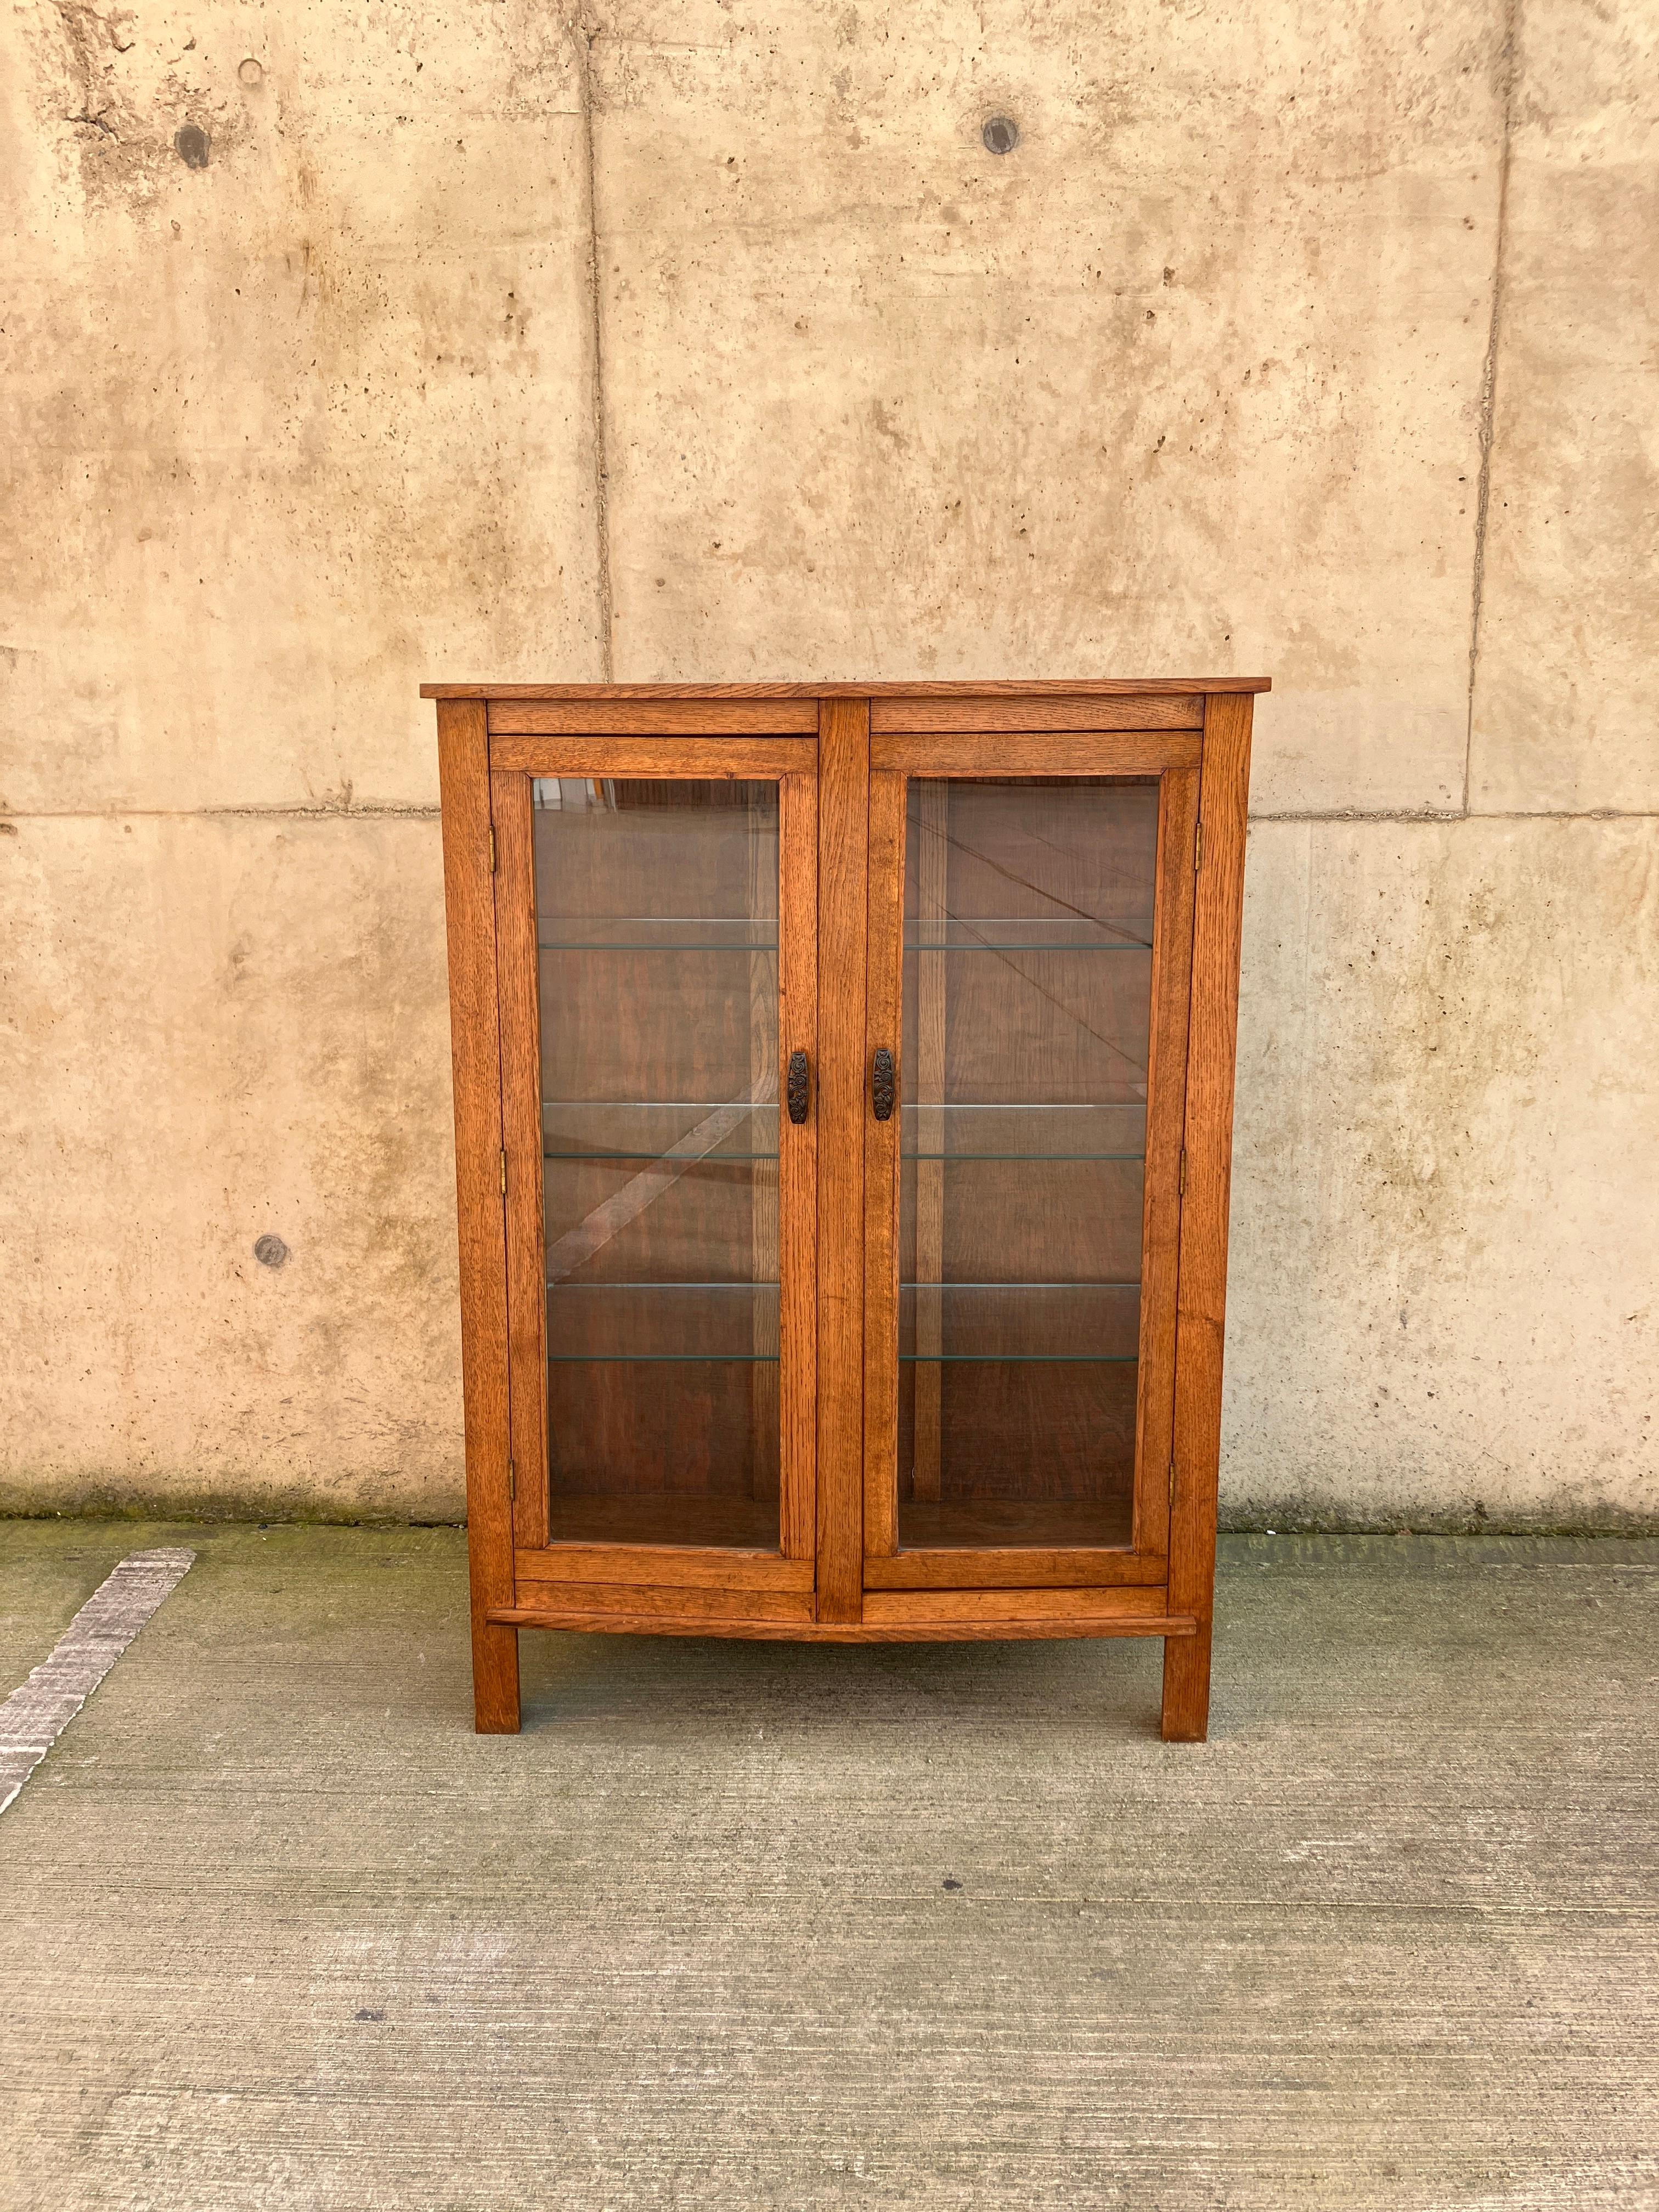 A stunning English Art Deco cabinet. The glazed antique cabinet has glass shelves for displaying items. Beautiful Art Deco handles. The cabinet is a lovely shape and size; the front has a slight triangular shape to it. The oak has plenty of